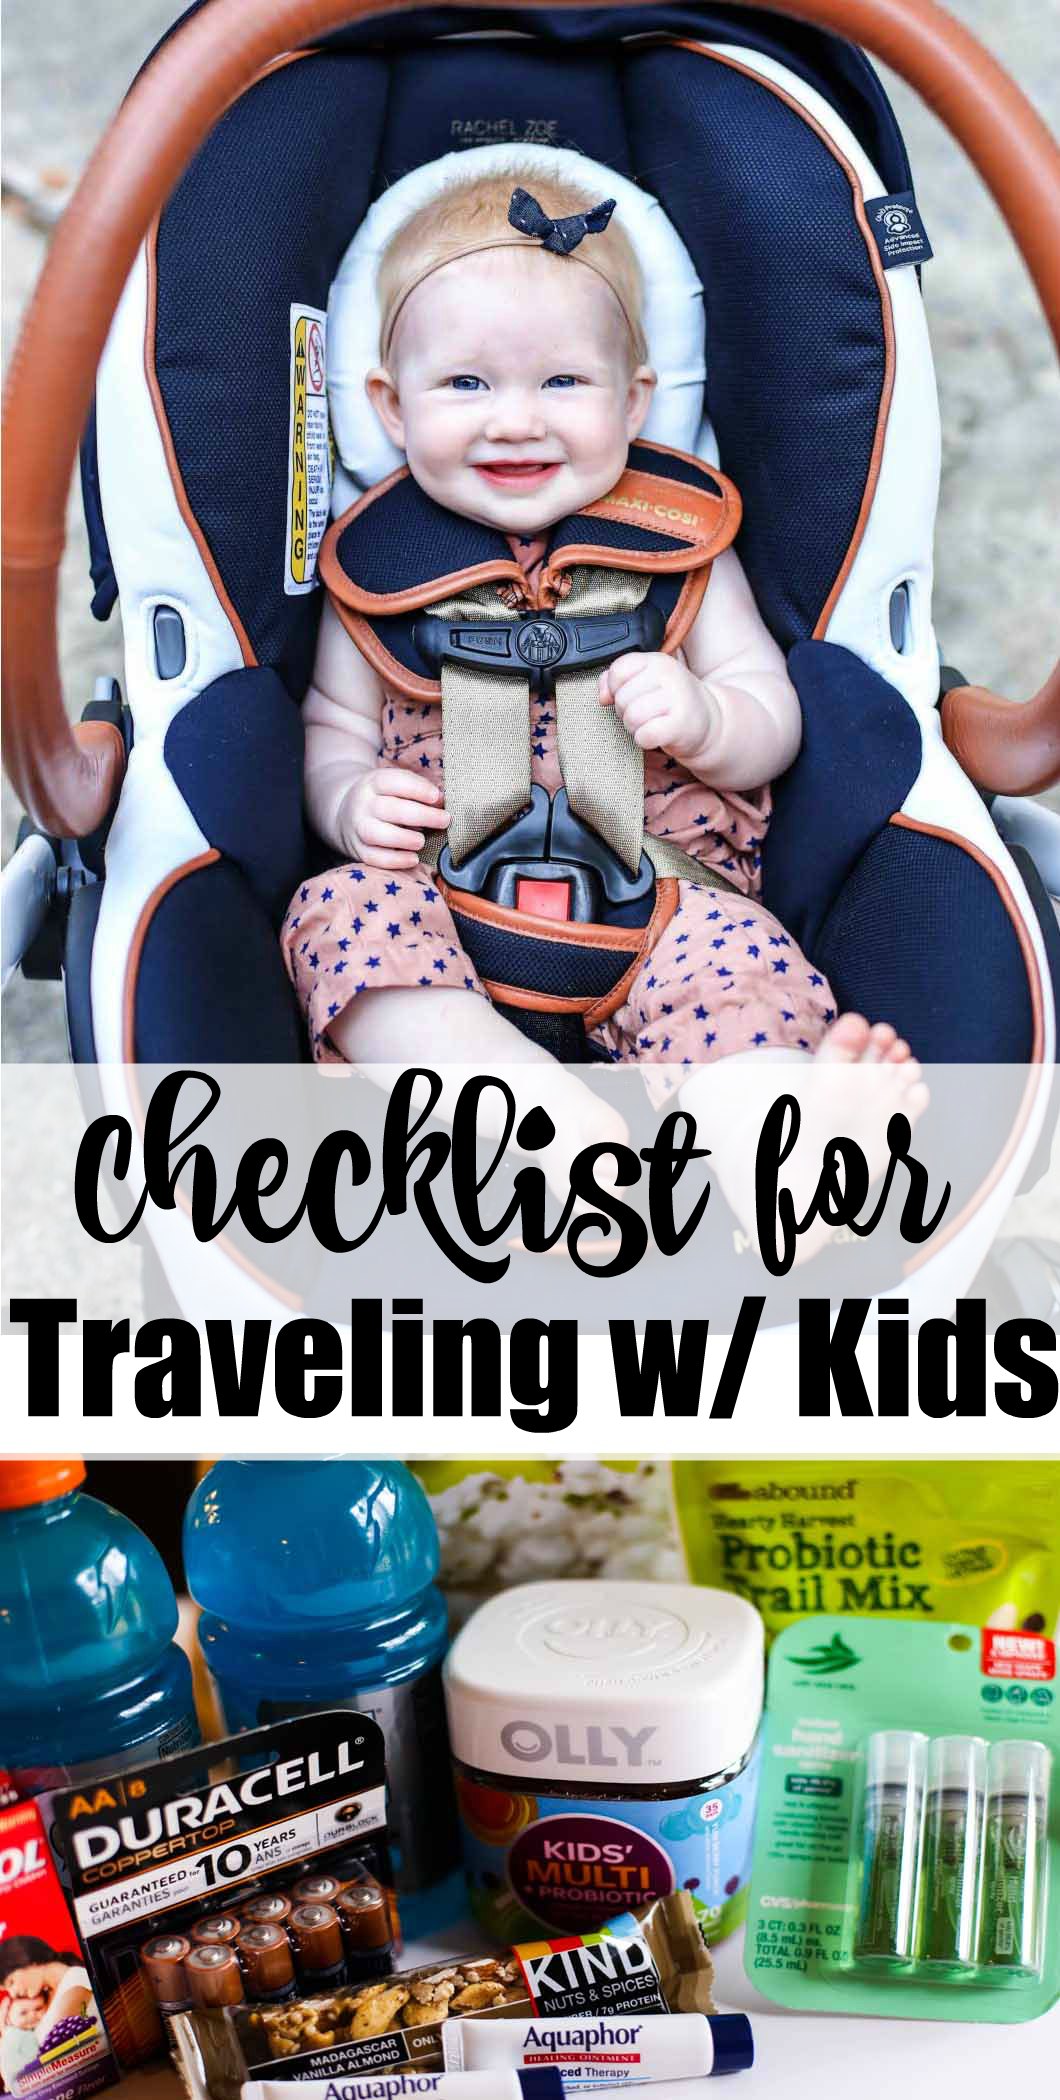 Checklist for traveling with kids